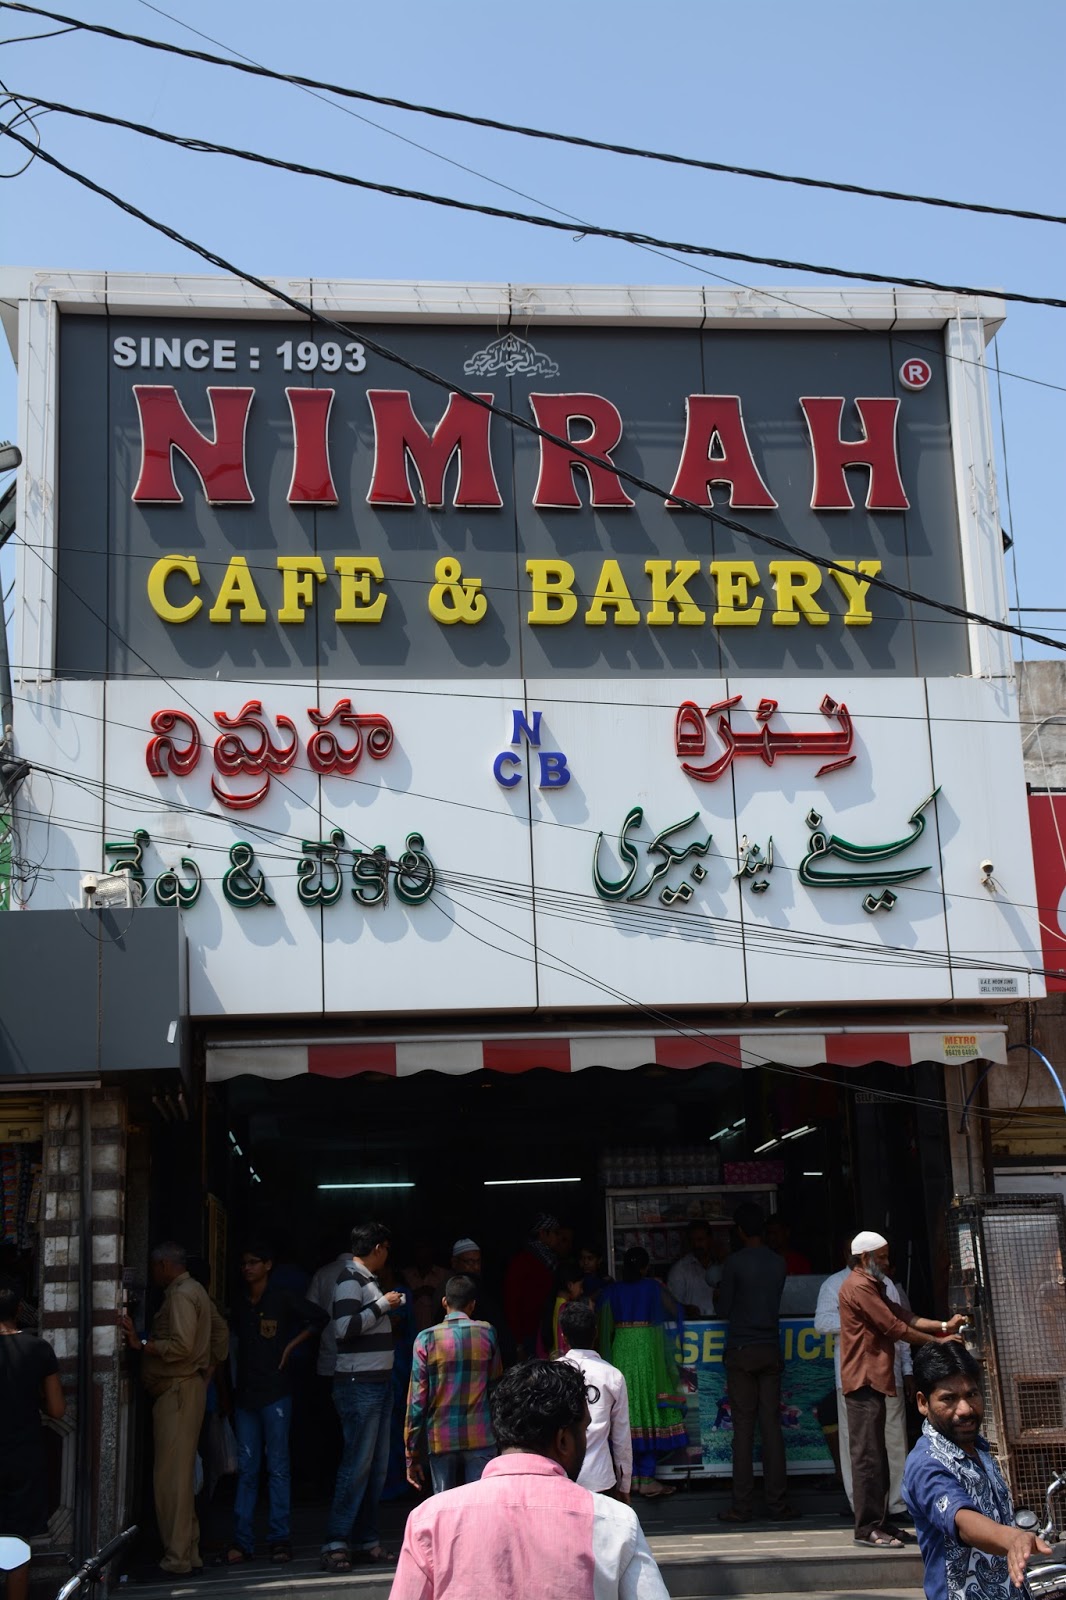 Our Travel Tales: Hyderabad Trip: Nimrah Cafe & Bakery